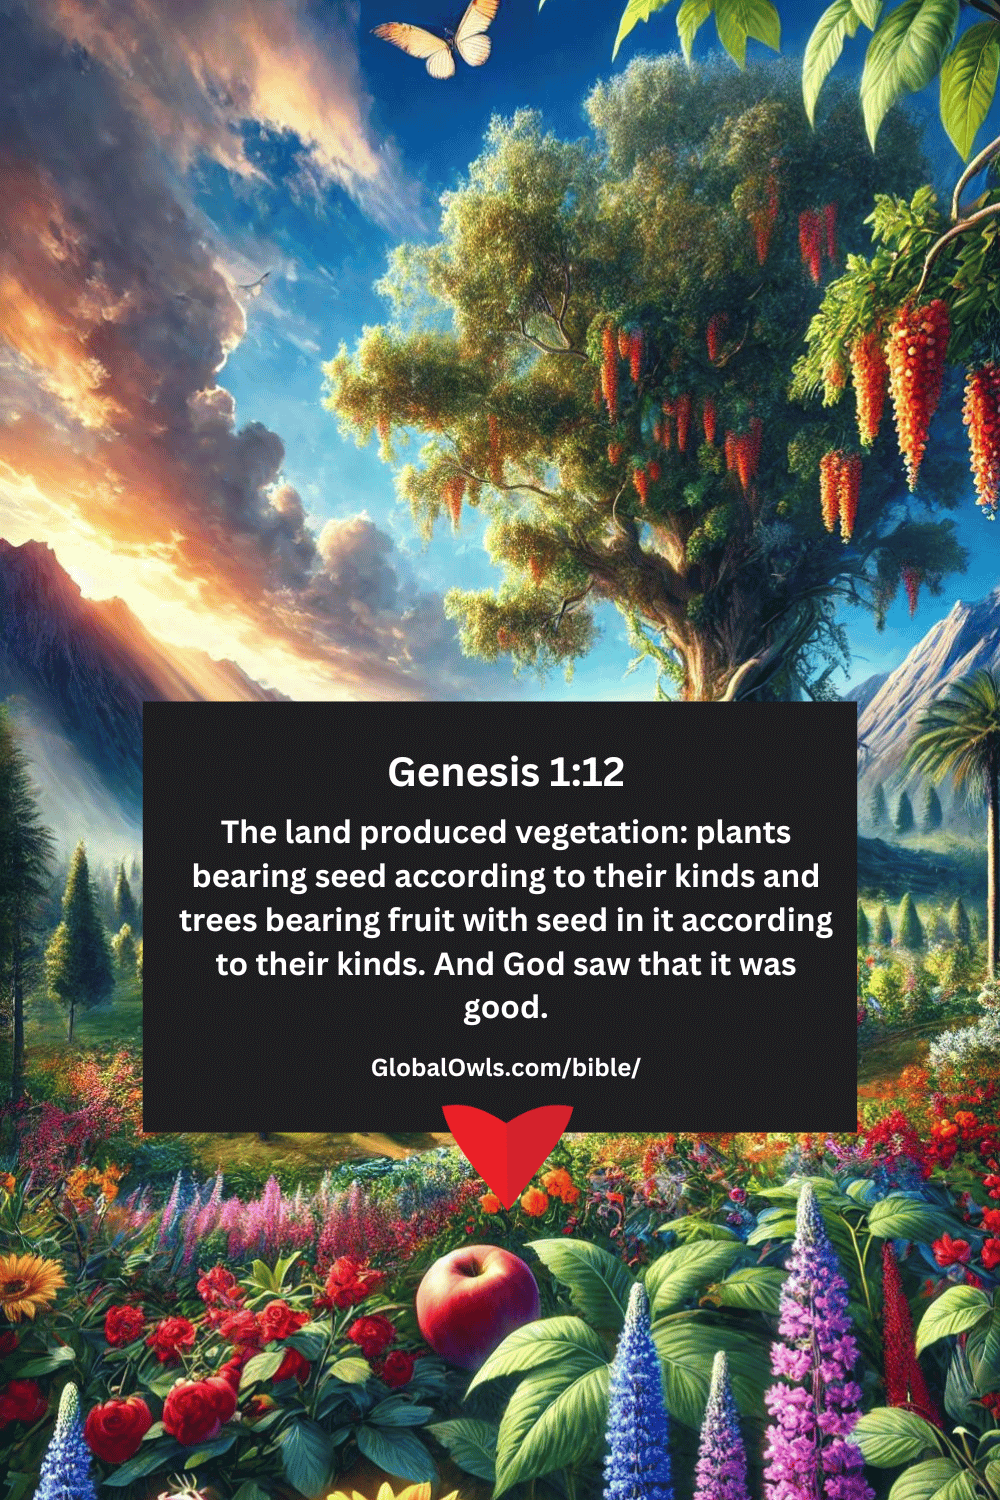 Genesis 1-12 The land produced vegetation plants bearing seed according to their kinds and trees bearing fruit with seed in it according to their kinds. And God saw that it was good.